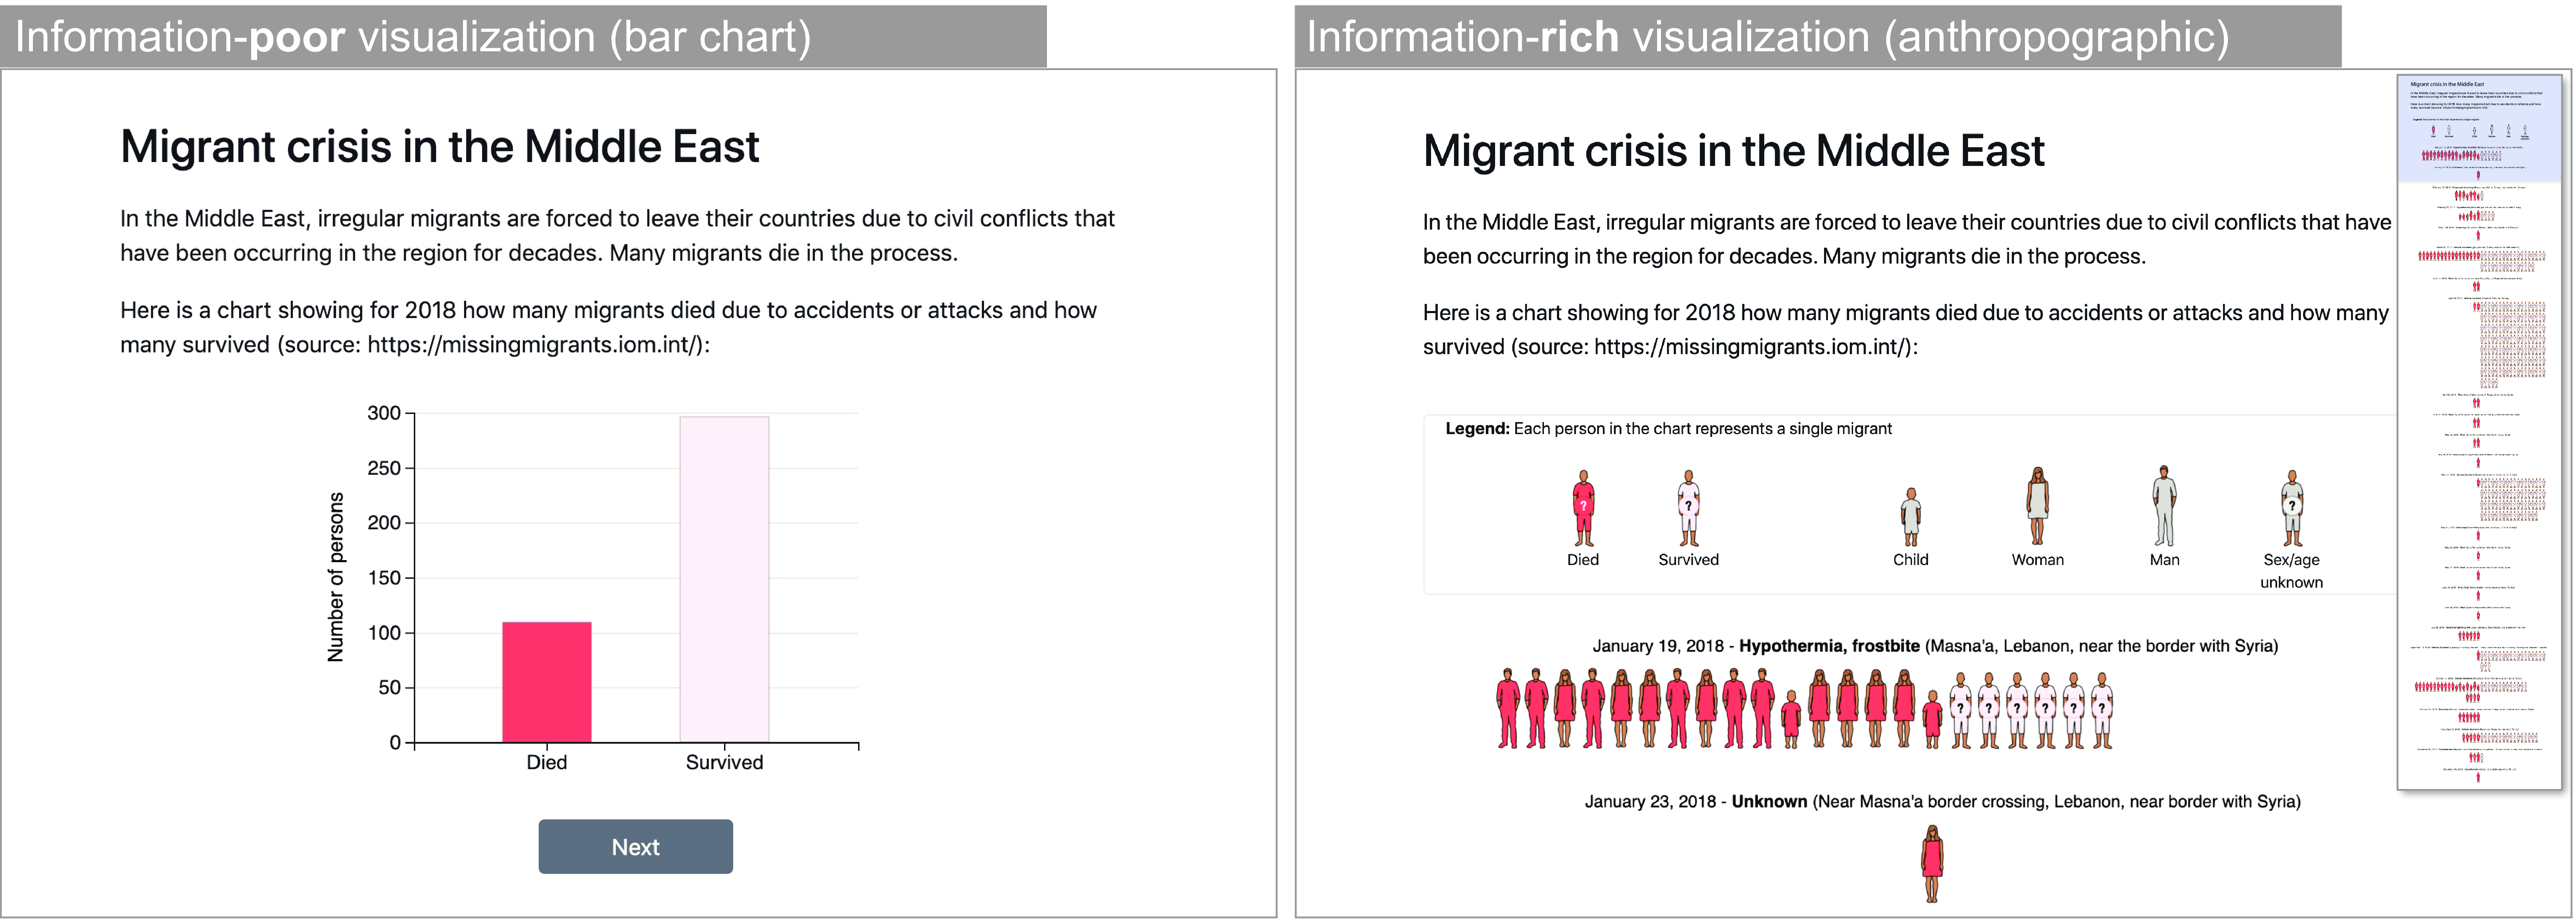 Two stimuli used in experiment 1, showing data from the Missing Migrants Project (missingmigrants.iom.int). On the left is the information-poor baseline condition, and on the right is the information-rich anthropographic condition (participants had to scroll to see the entire visualization – see overview on the right).